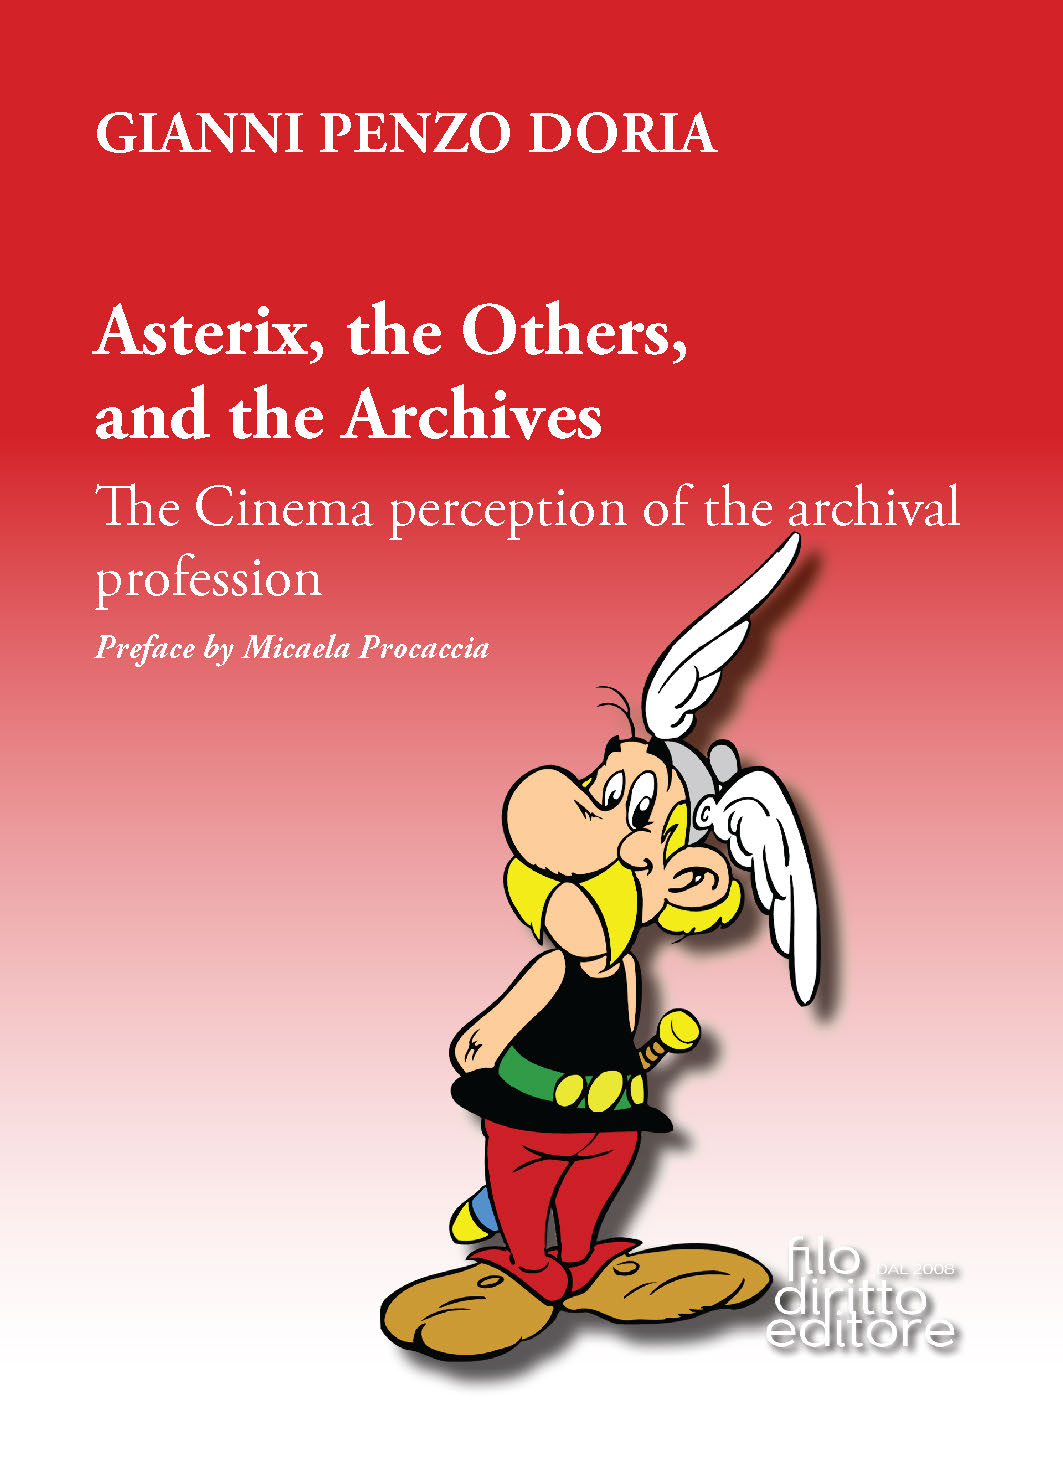 Asterix, the Others, and the Archives